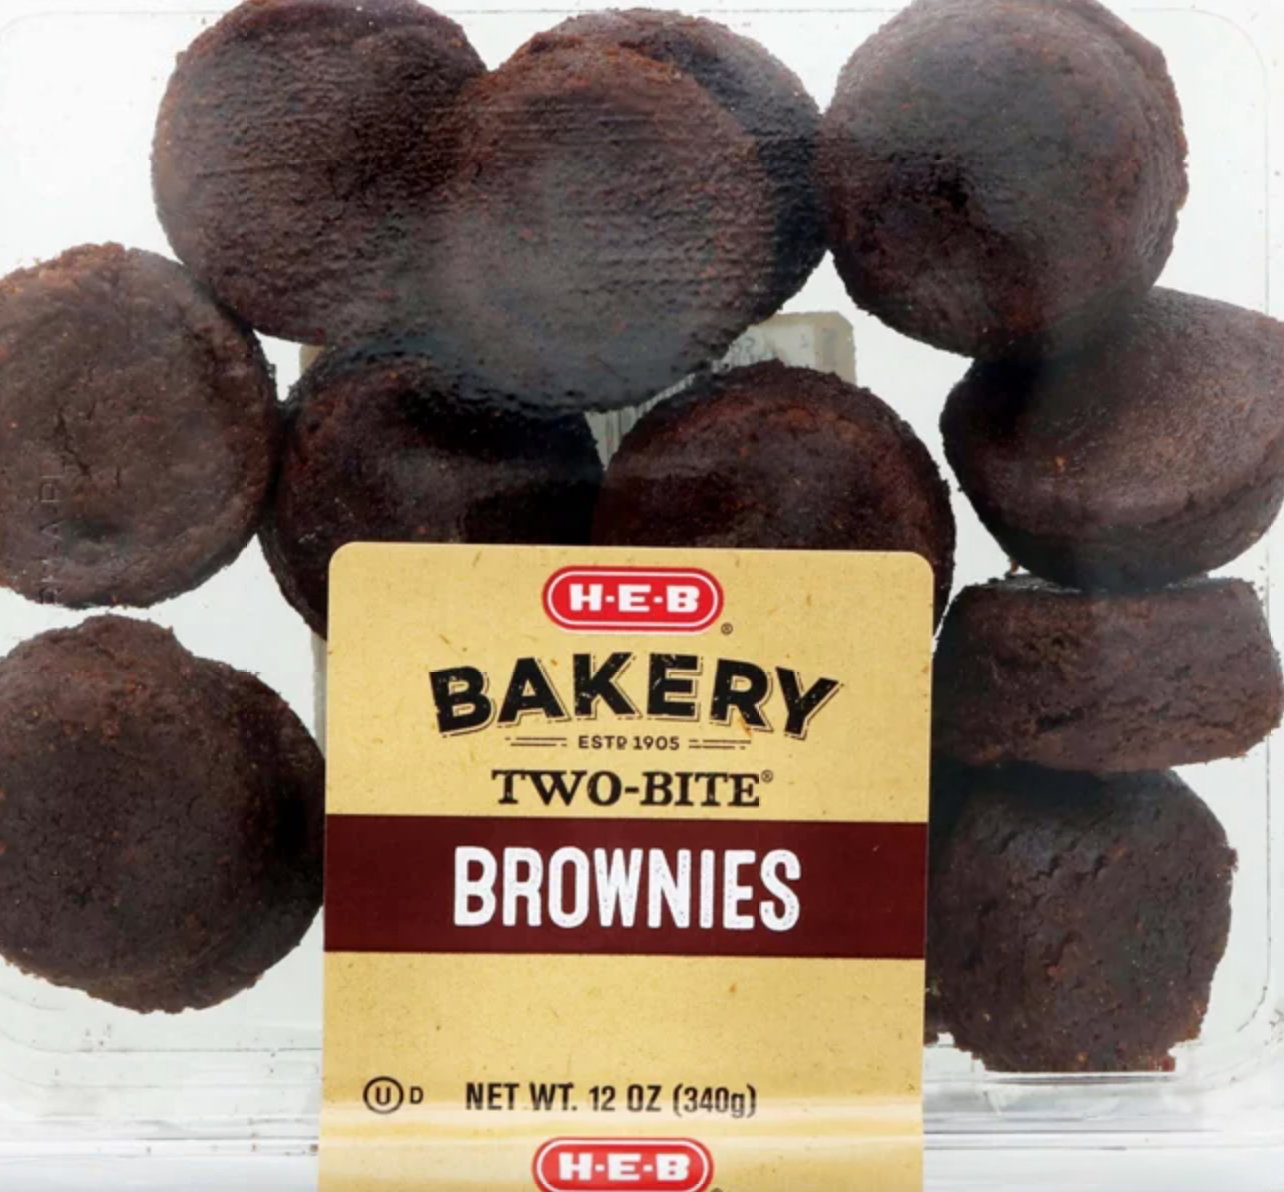 HEB Bakery Two-Bite Brownie Recall